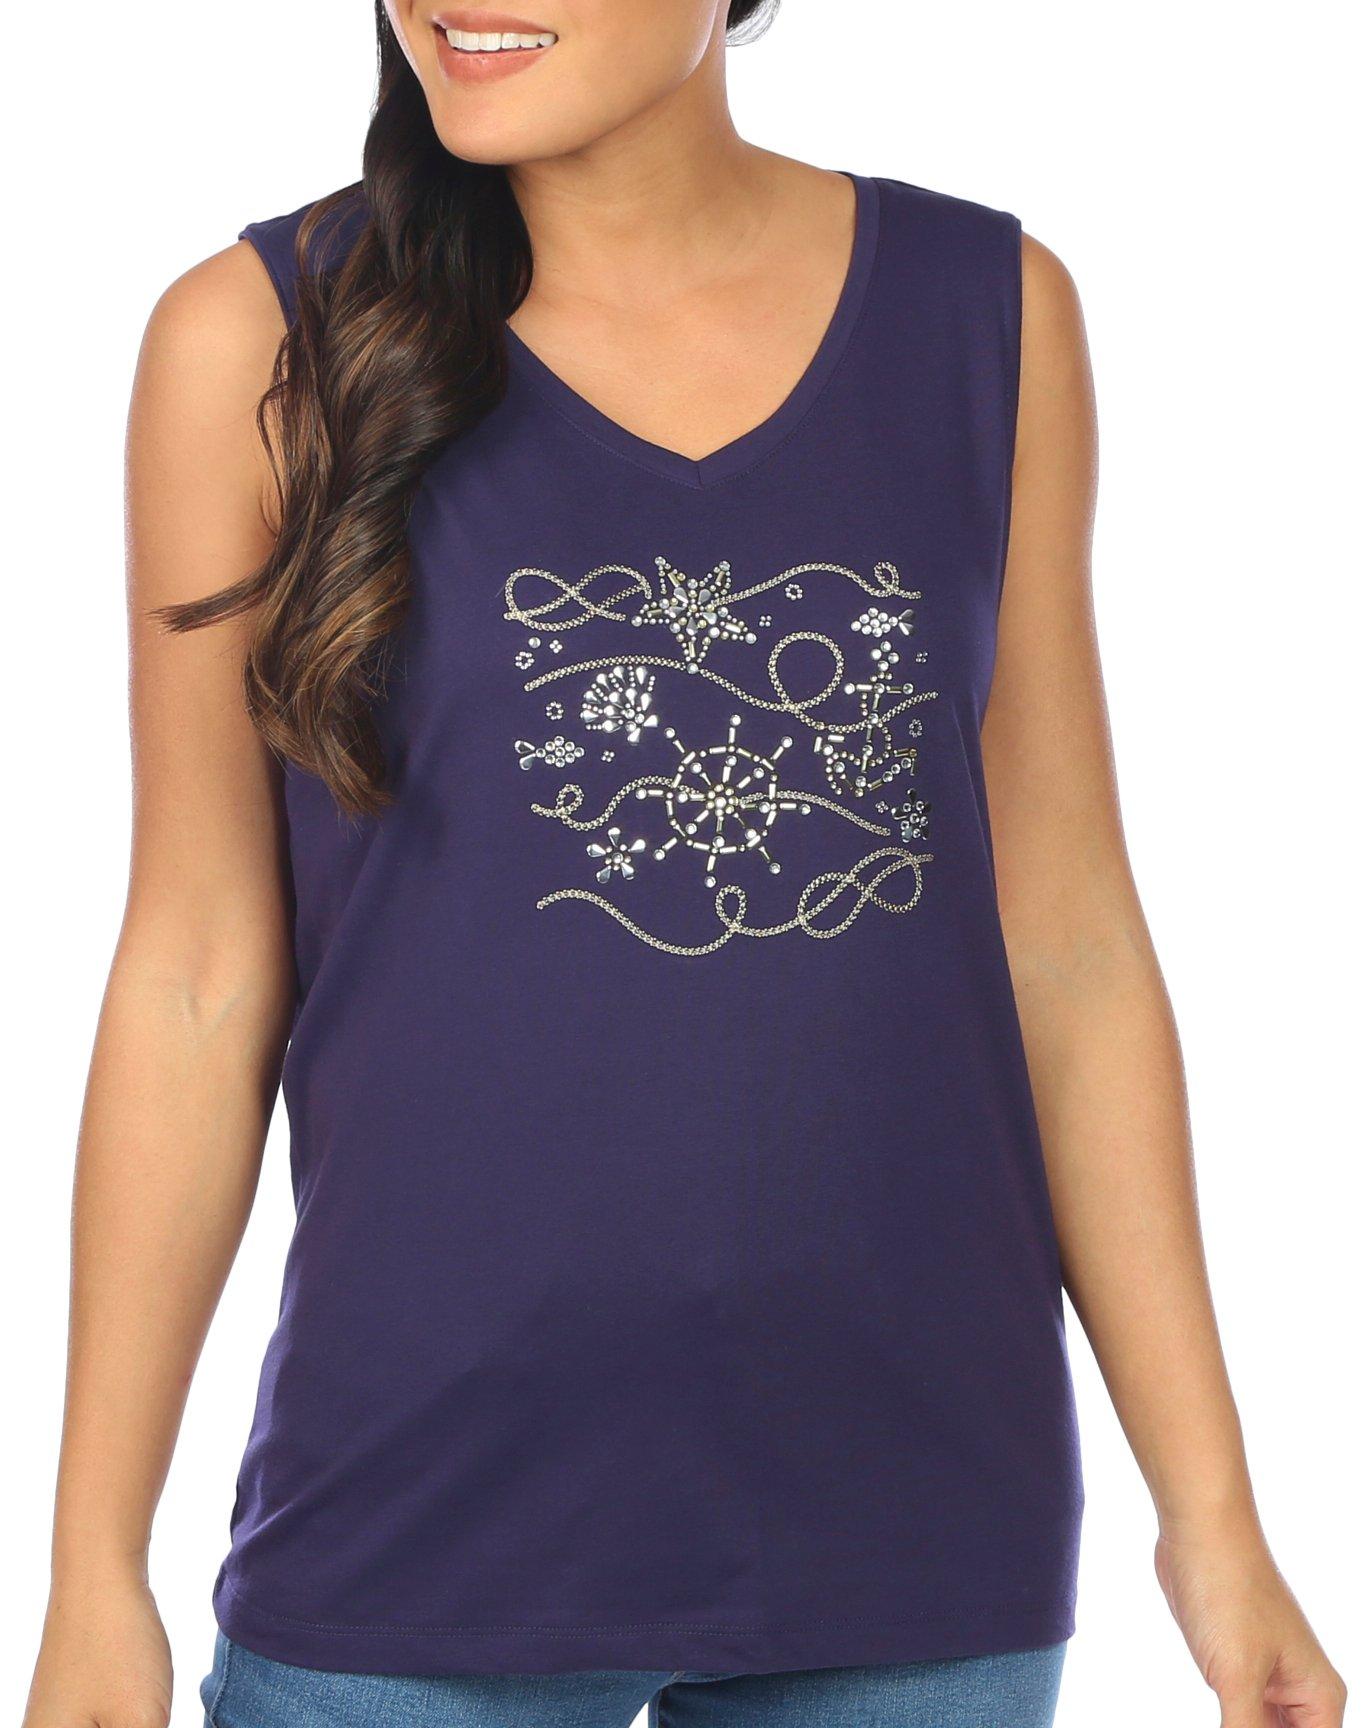 Petite Solid Embellished Sleeveless Top